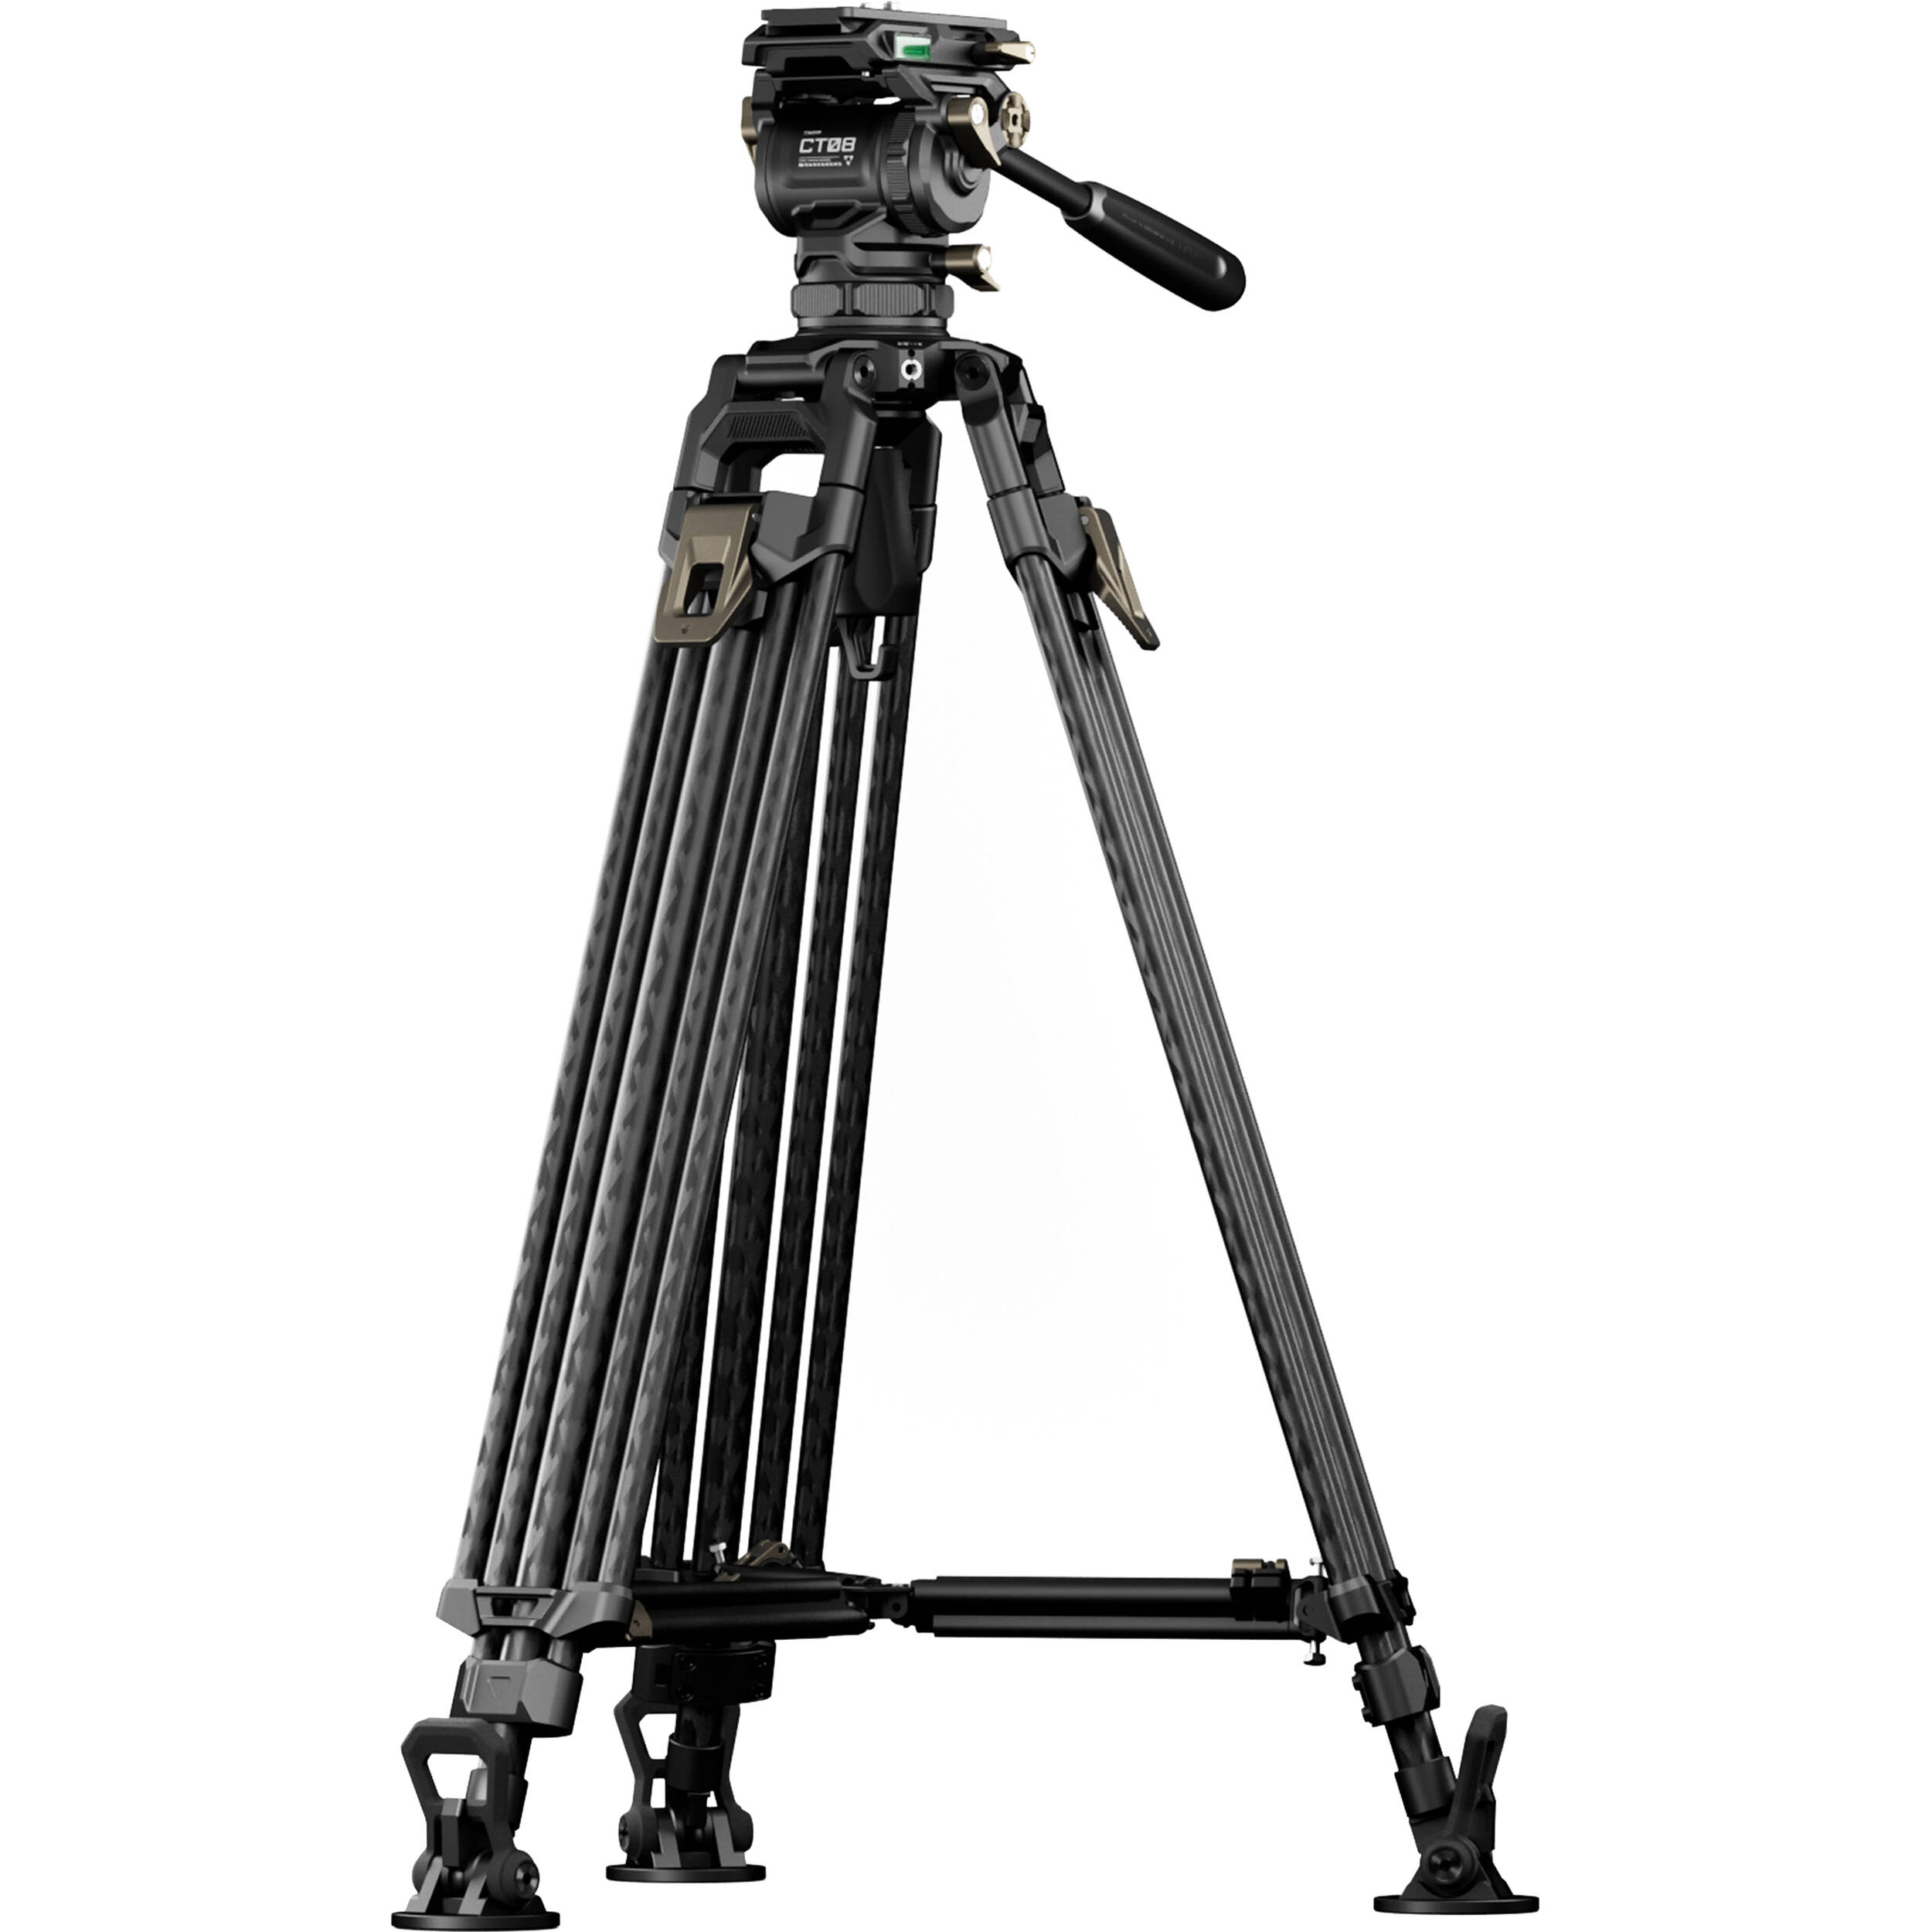 Tilta 75mm Cine Fluid Head with 2-Stage One-Touch Carbon Fiber Tripod System